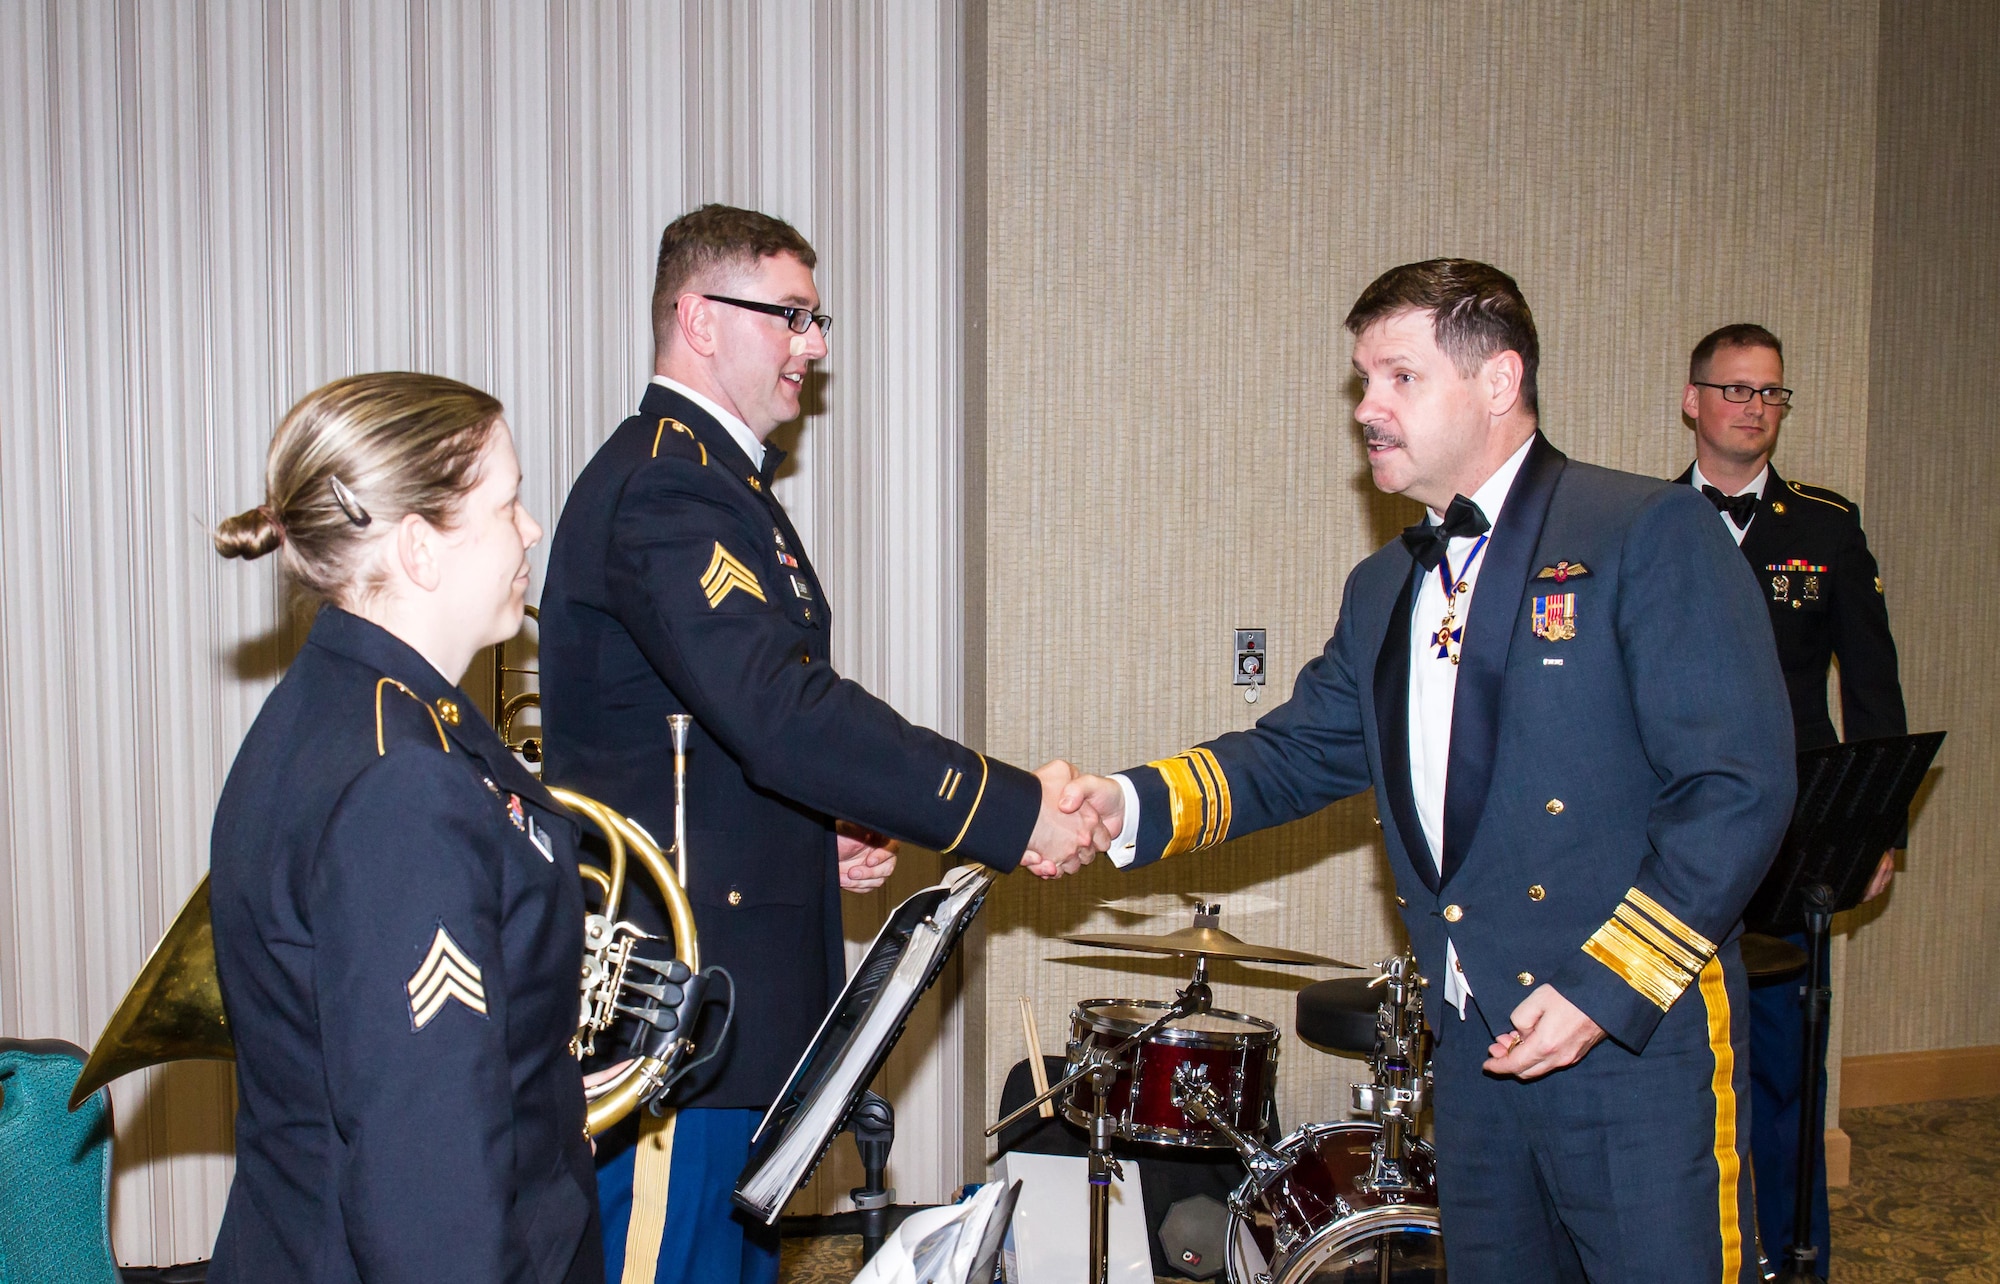 Lt. Gen. Pierre St. Amand, deputy commander for North American Aerospace Defense Command (NORAD), shows his appreciation to the Army’s I Corps Band for providing entertainment during the Canadian Mess Dinner April 15 at the American Lake Conference Center, Joint Base Lewis-McChord. (Courtesy photo by Conrad Neumann II)